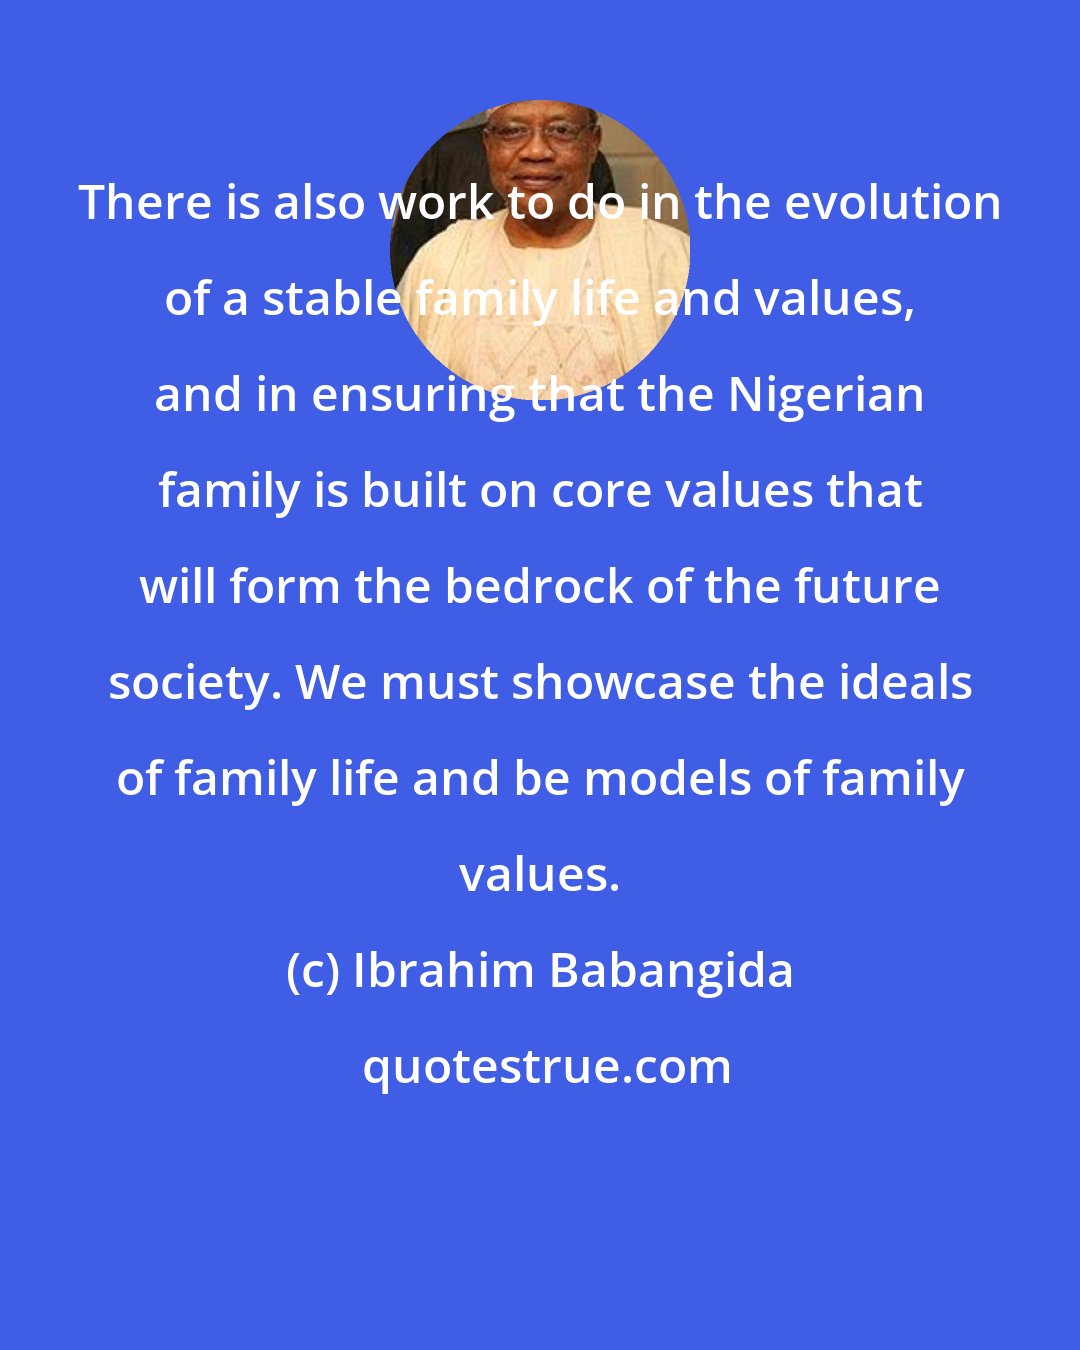 Ibrahim Babangida: There is also work to do in the evolution of a stable family life and values, and in ensuring that the Nigerian family is built on core values that will form the bedrock of the future society. We must showcase the ideals of family life and be models of family values.